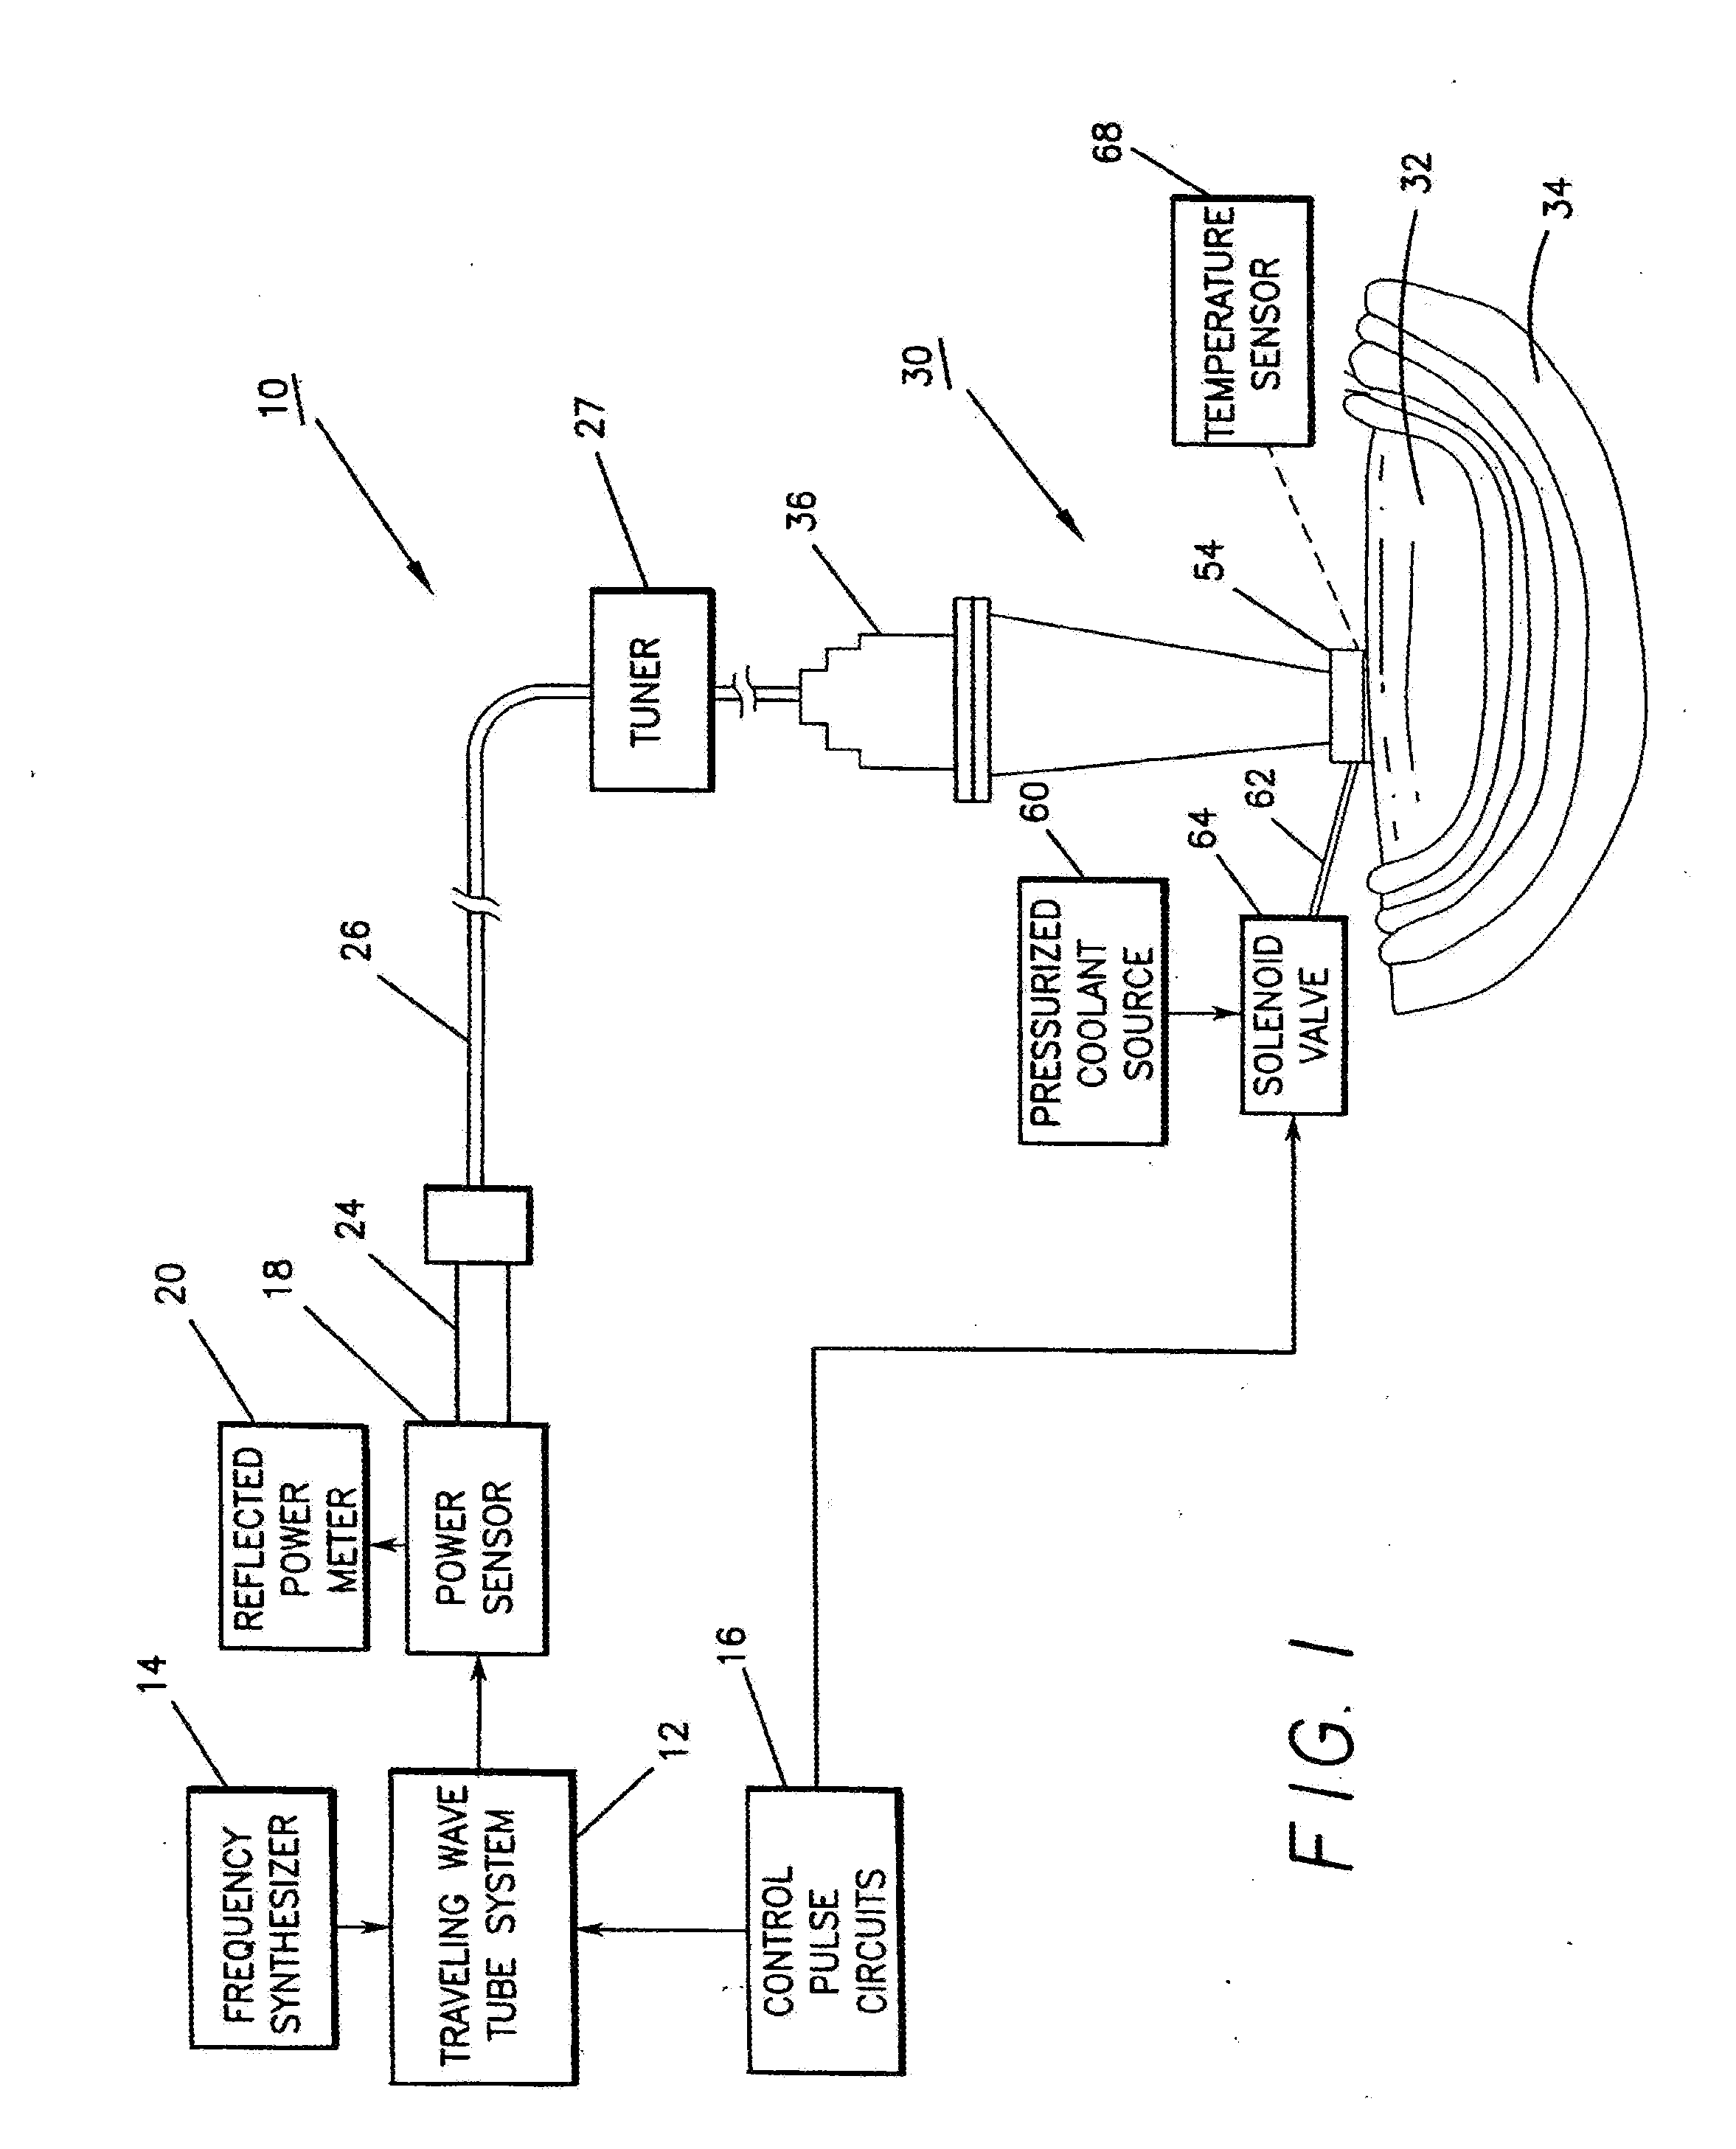 Method and Apparatus for Treating Subcutaneous Histological Features